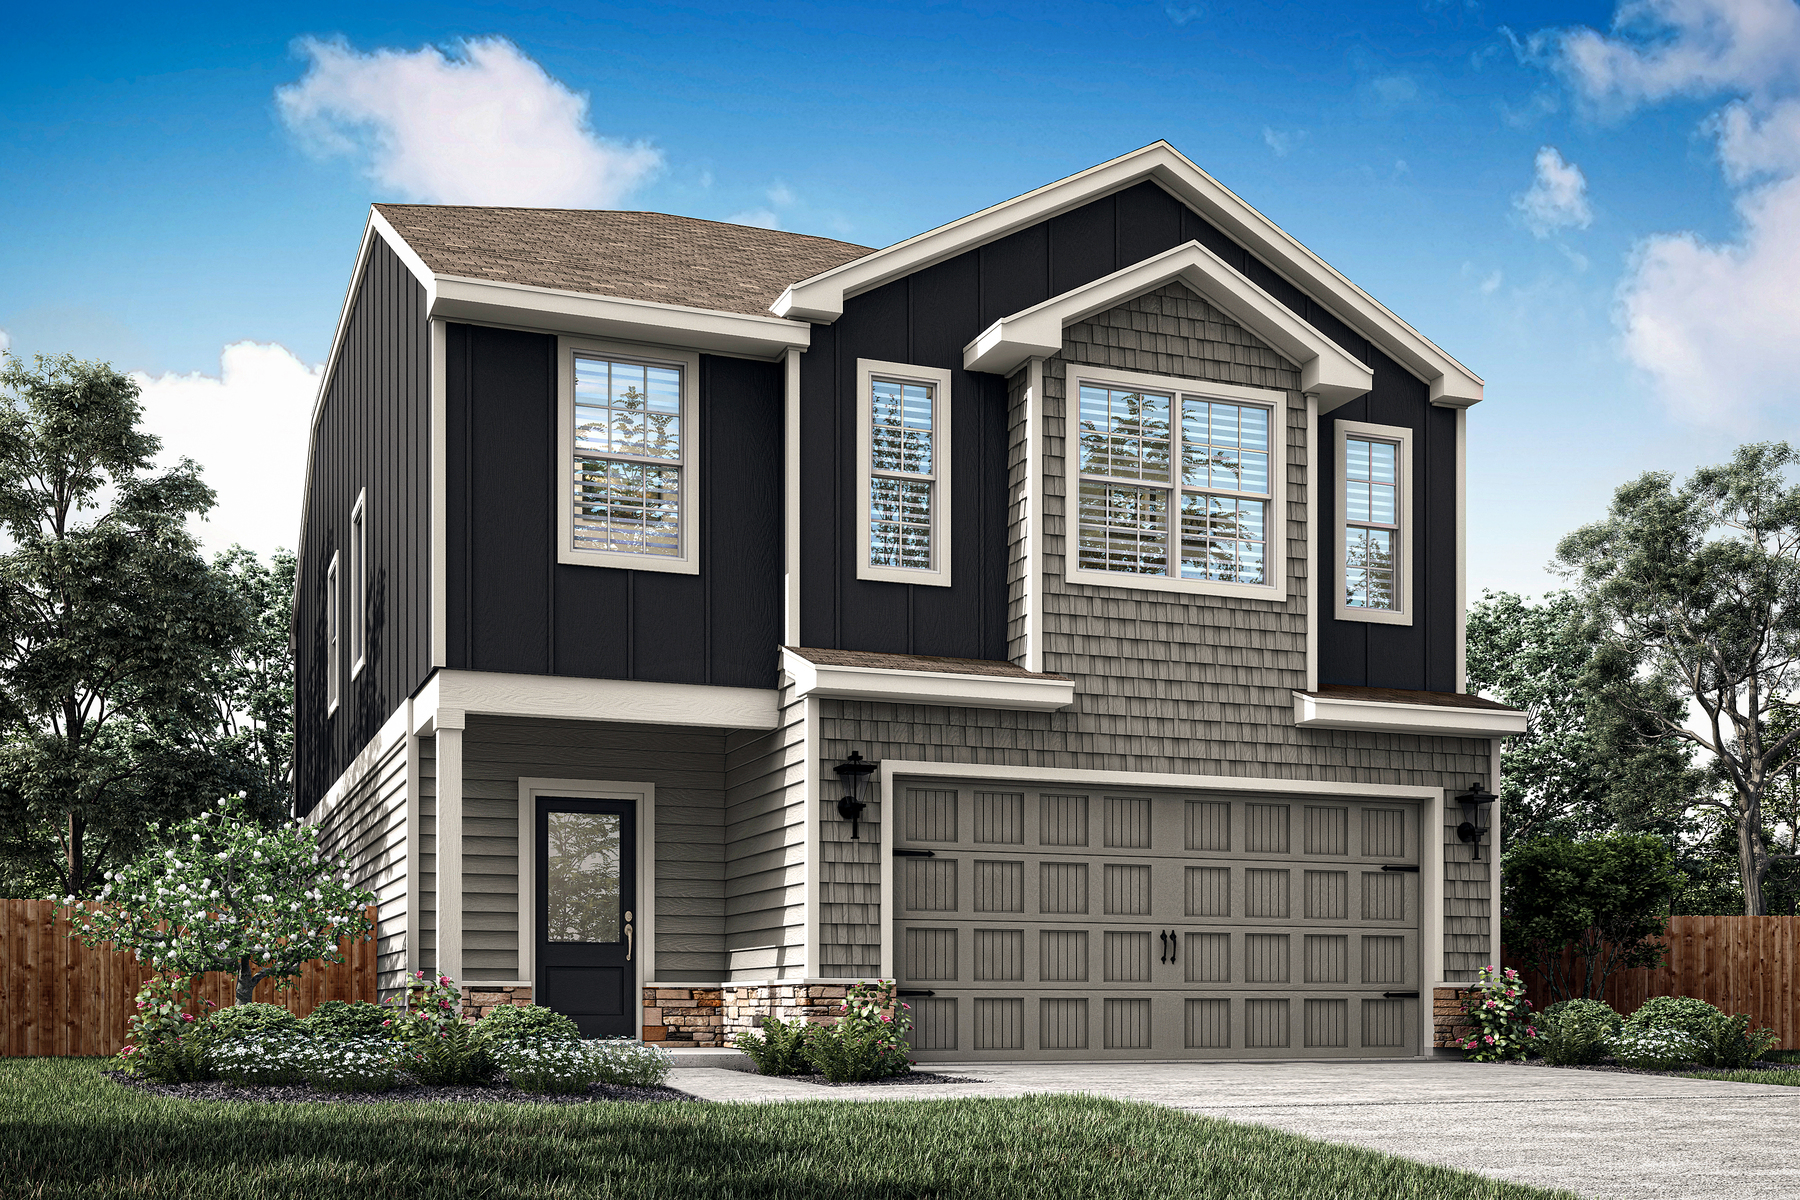 The Osage Plan by LGI Homes at Park Vista at El Tesoro in Houston features four bedrooms, two-and-a-half bathrooms, and a large outdoor patio.